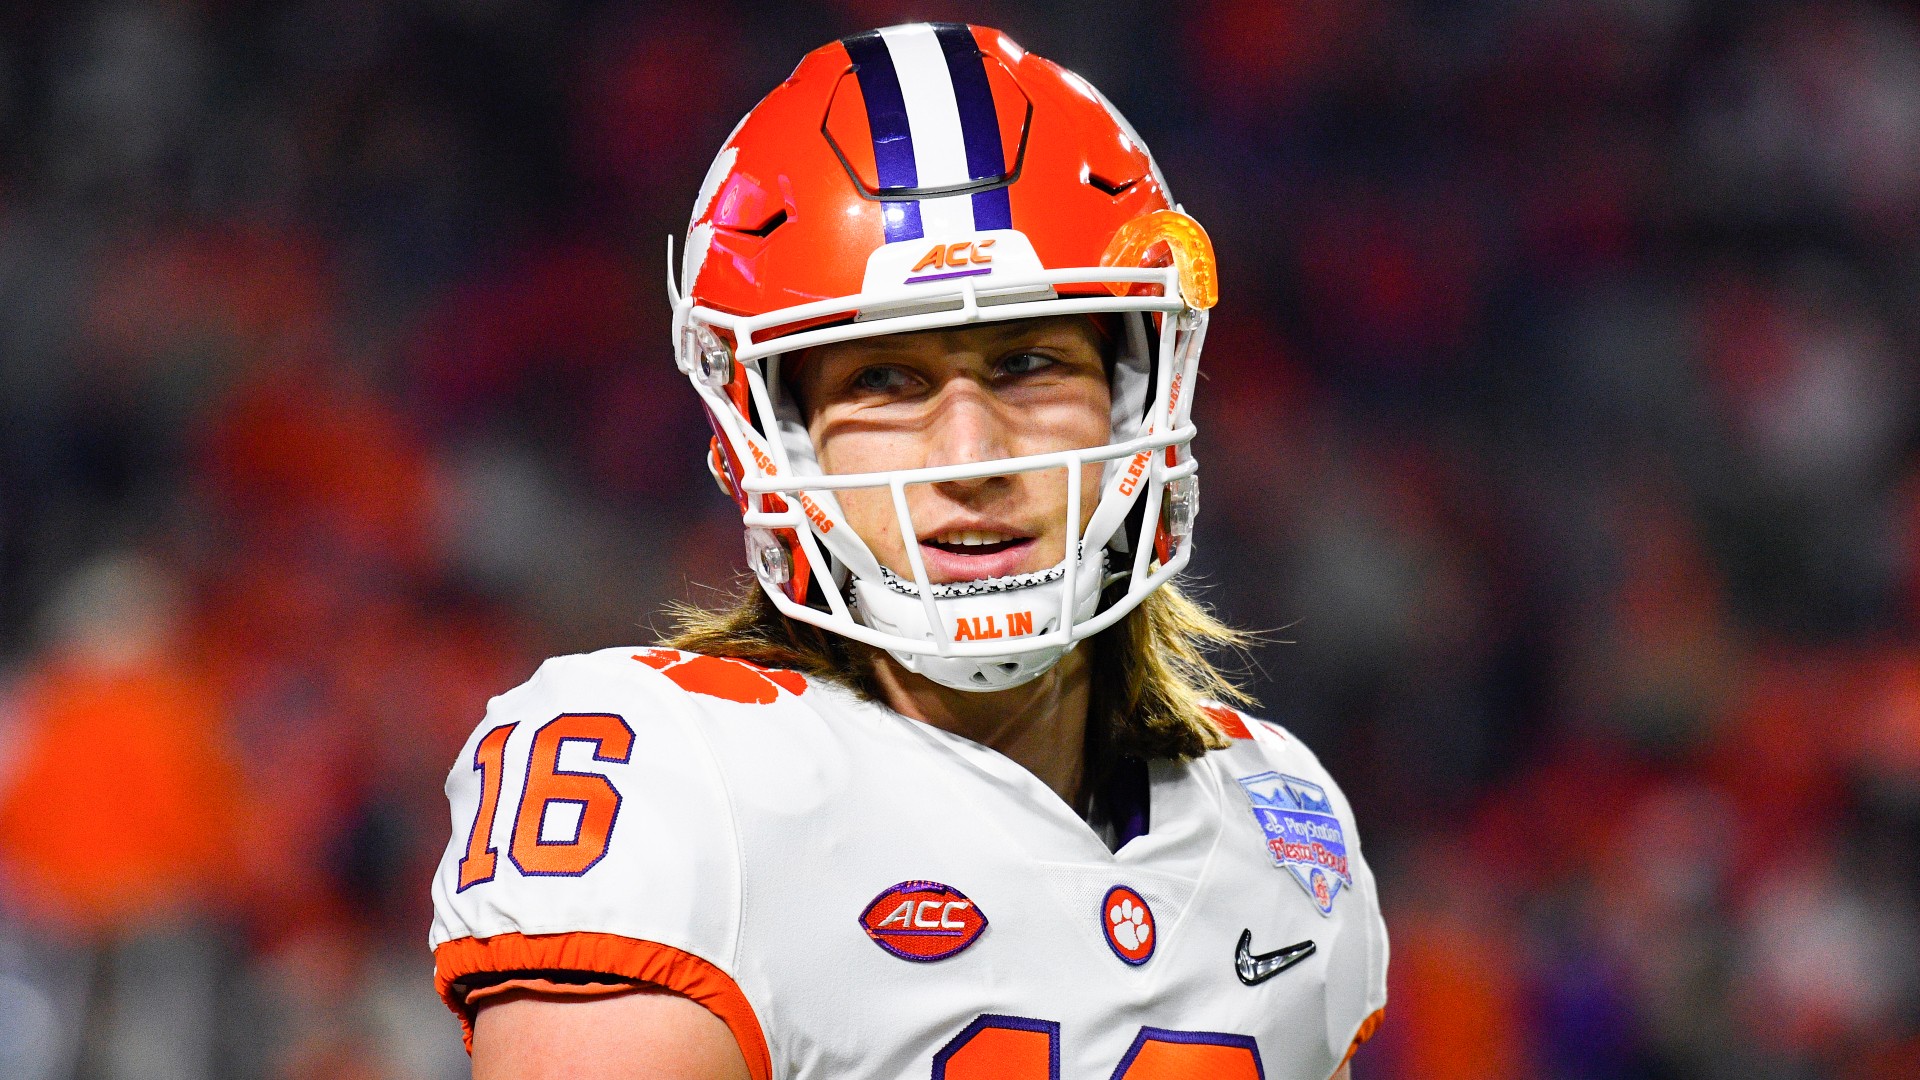 Sugar Bowl Special: Bet $20, Win $125 if Trevor Lawrence Throws for at Least 1 Yard! article feature image